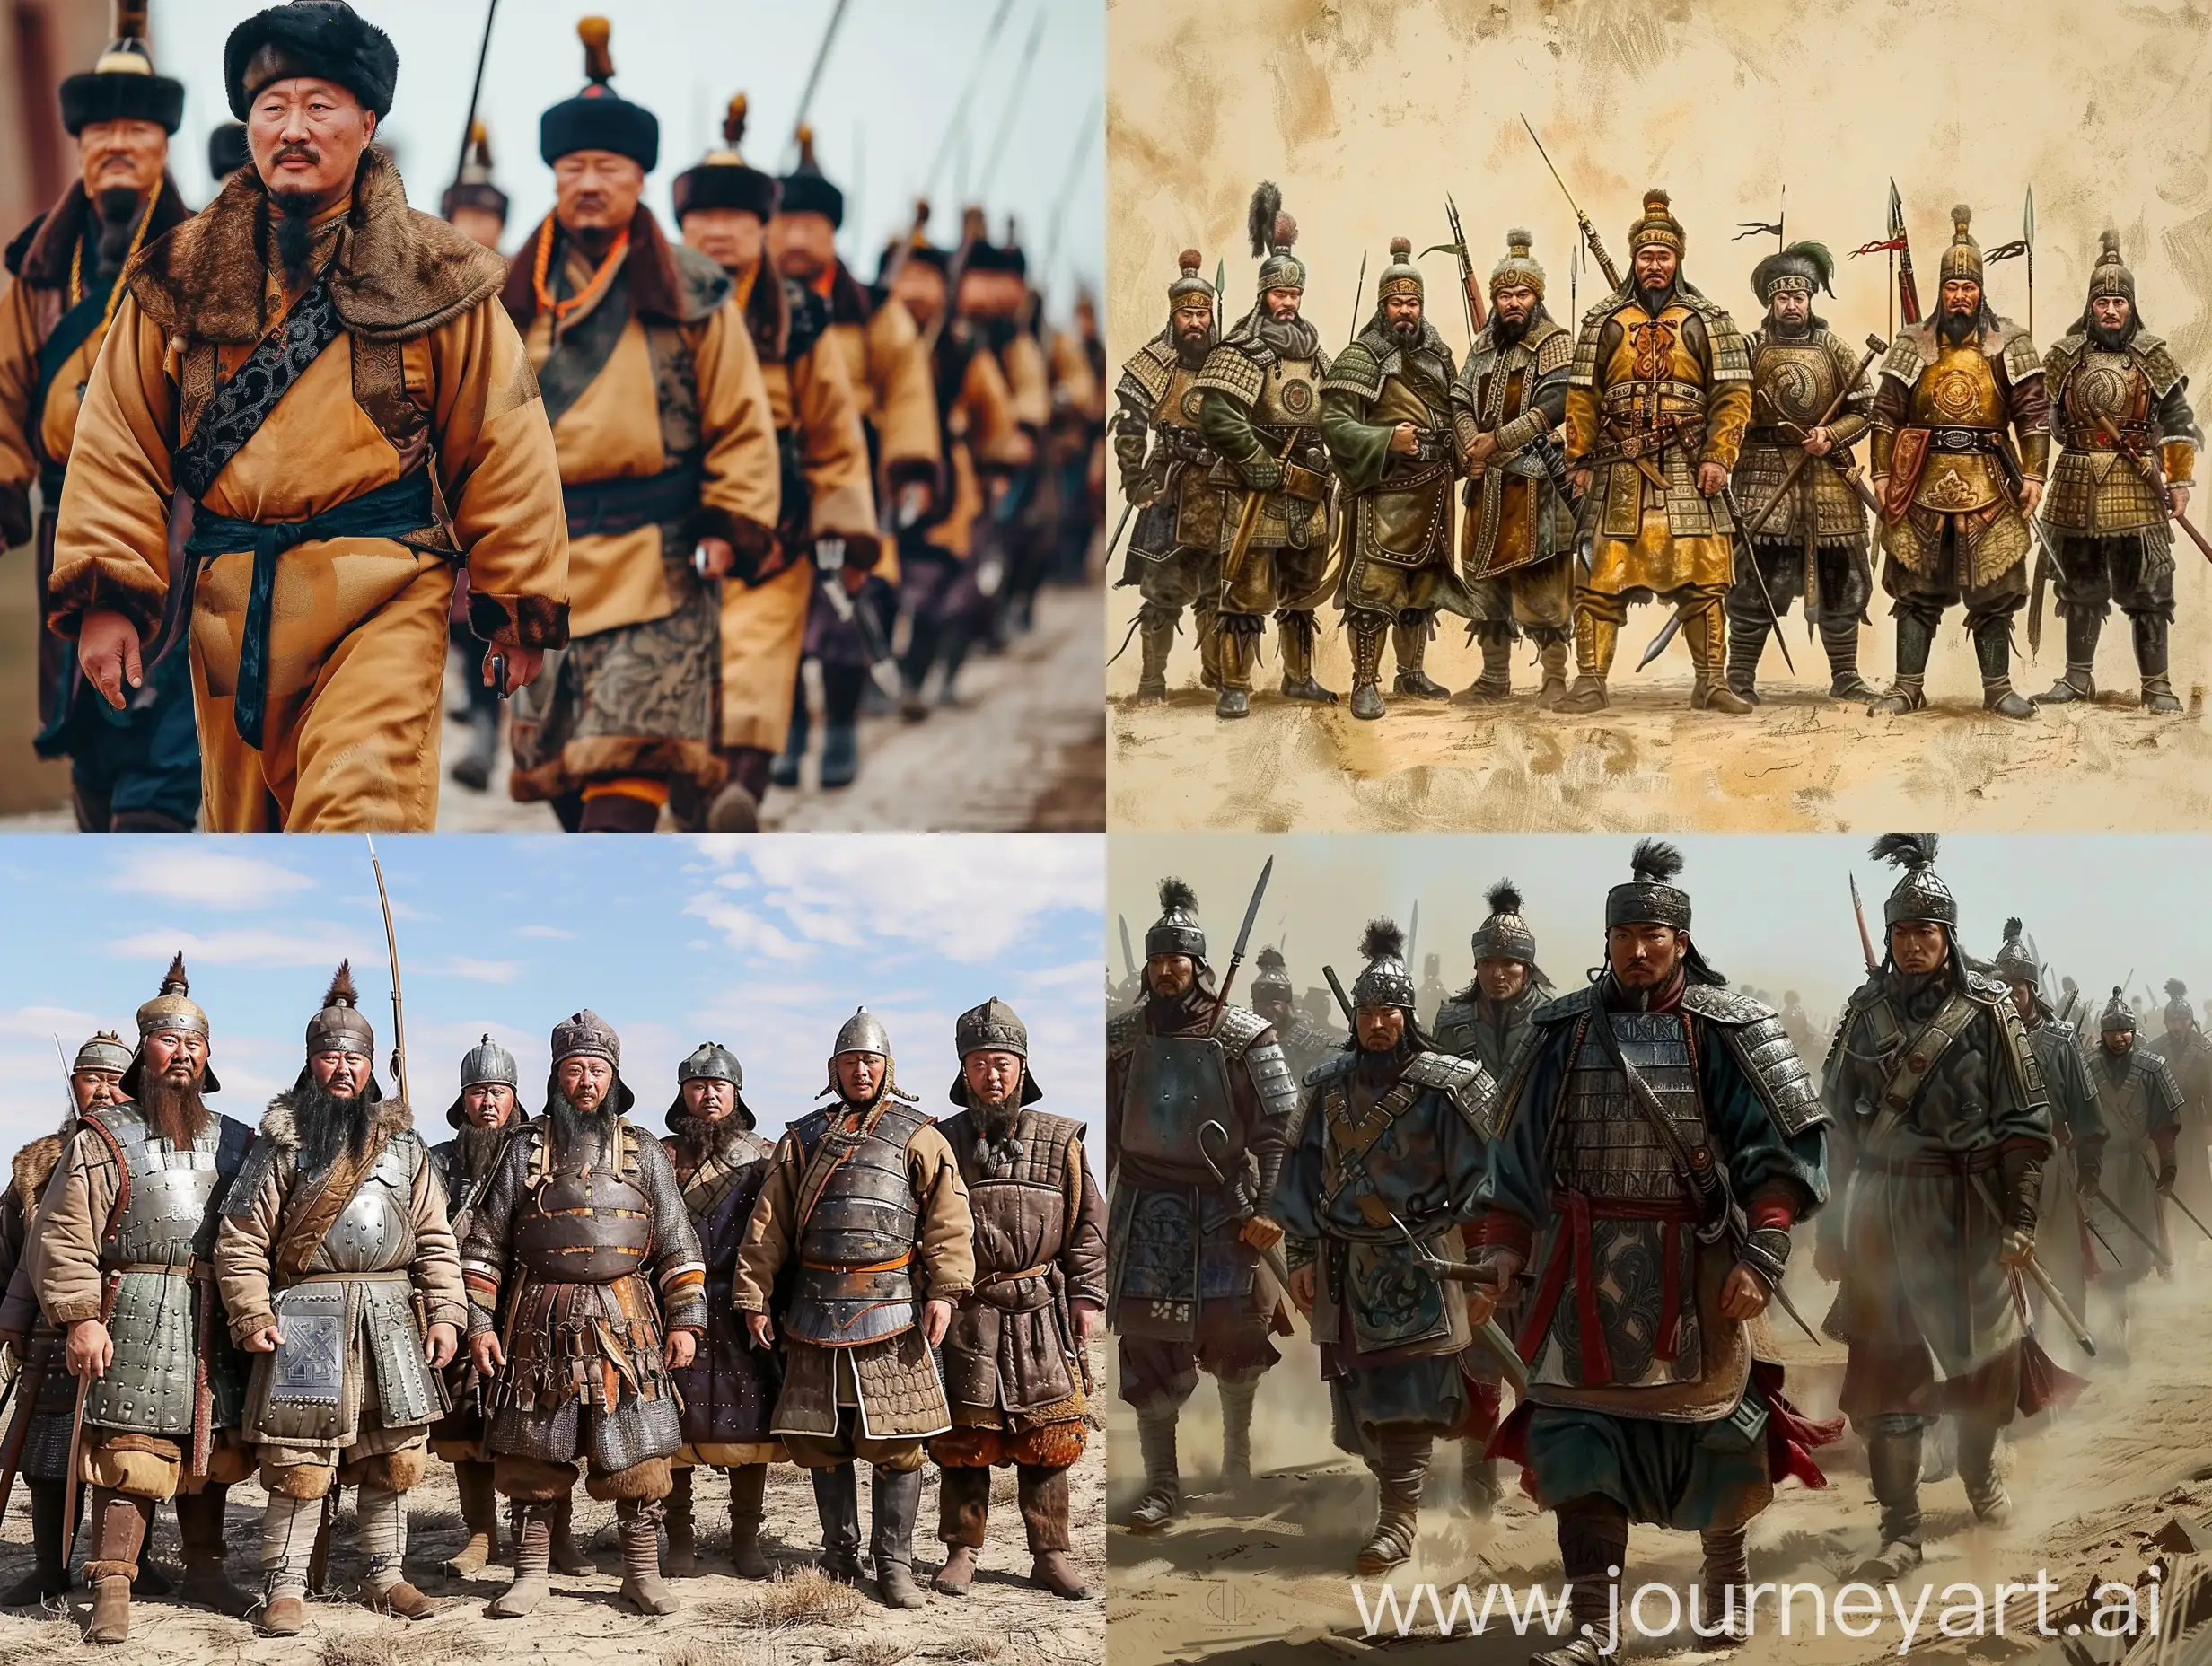 Arban-u Darga means "Aravt Commander" and leads a military unit of 10 soldiers. Aravts are the smallest and most flexible units of the Mongol army. In the style of medieval Mongols.